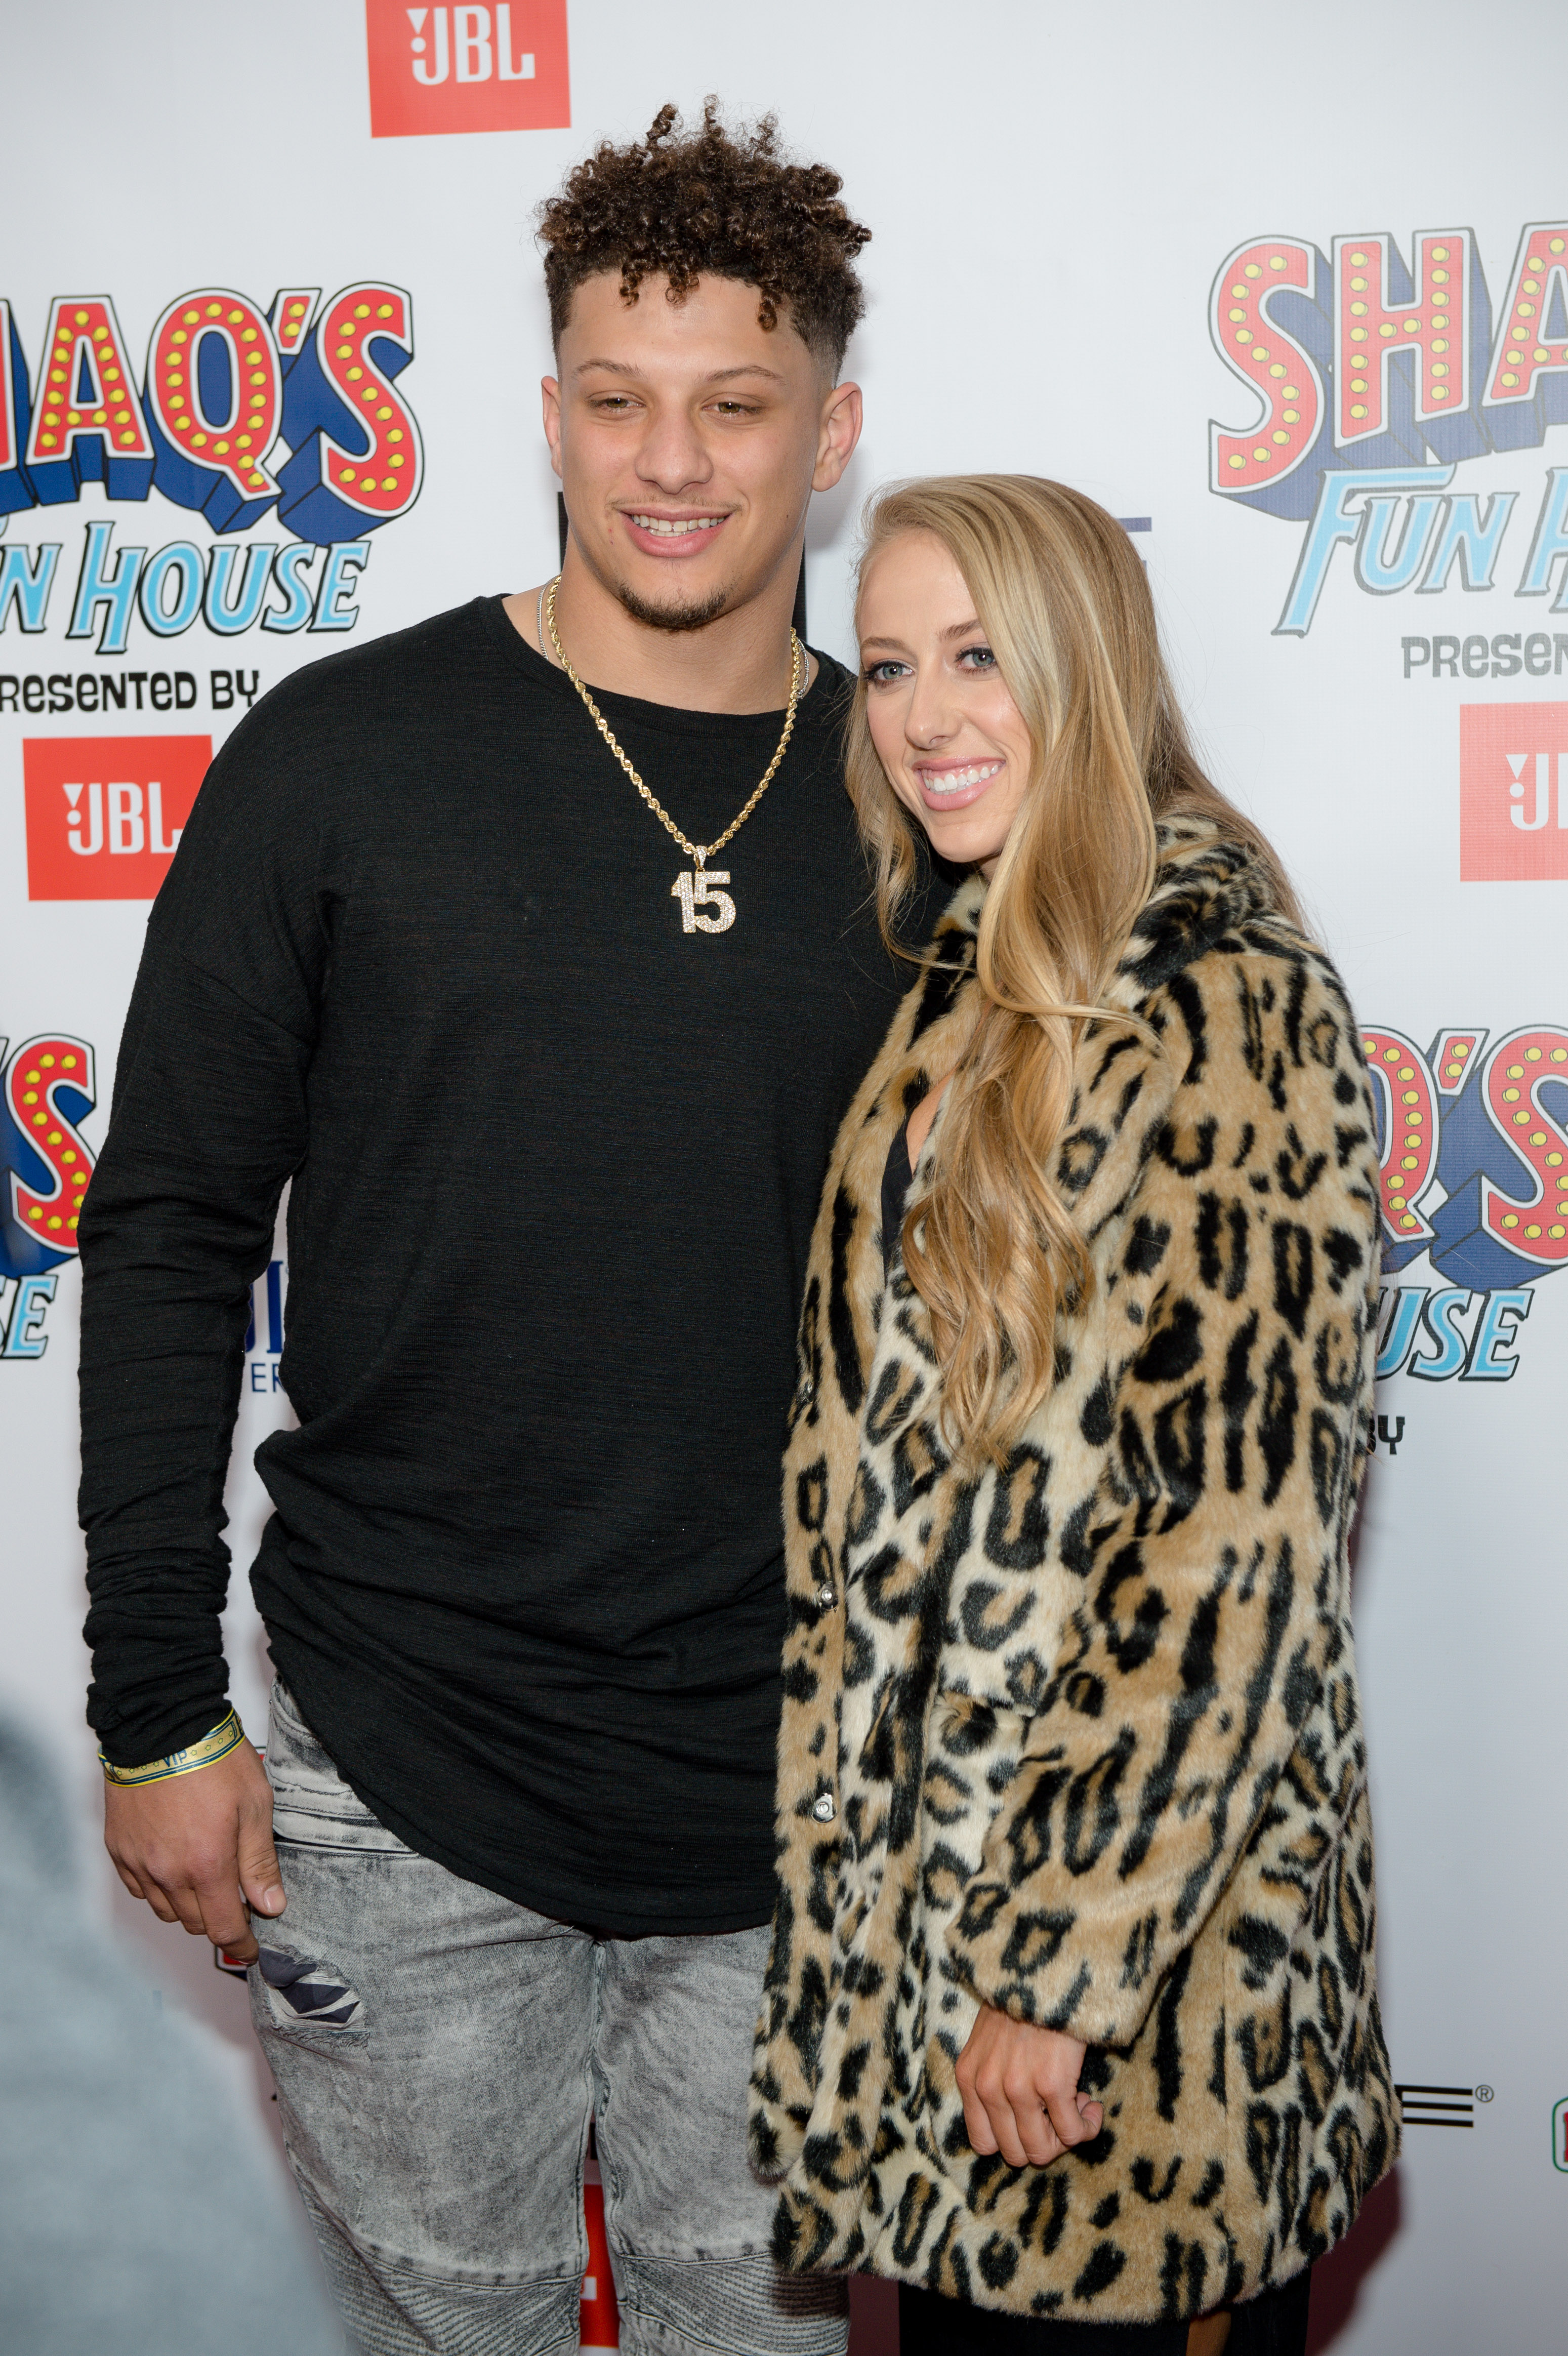 NFL Player Patrick Mahomes Proposes to High School Sweetheart